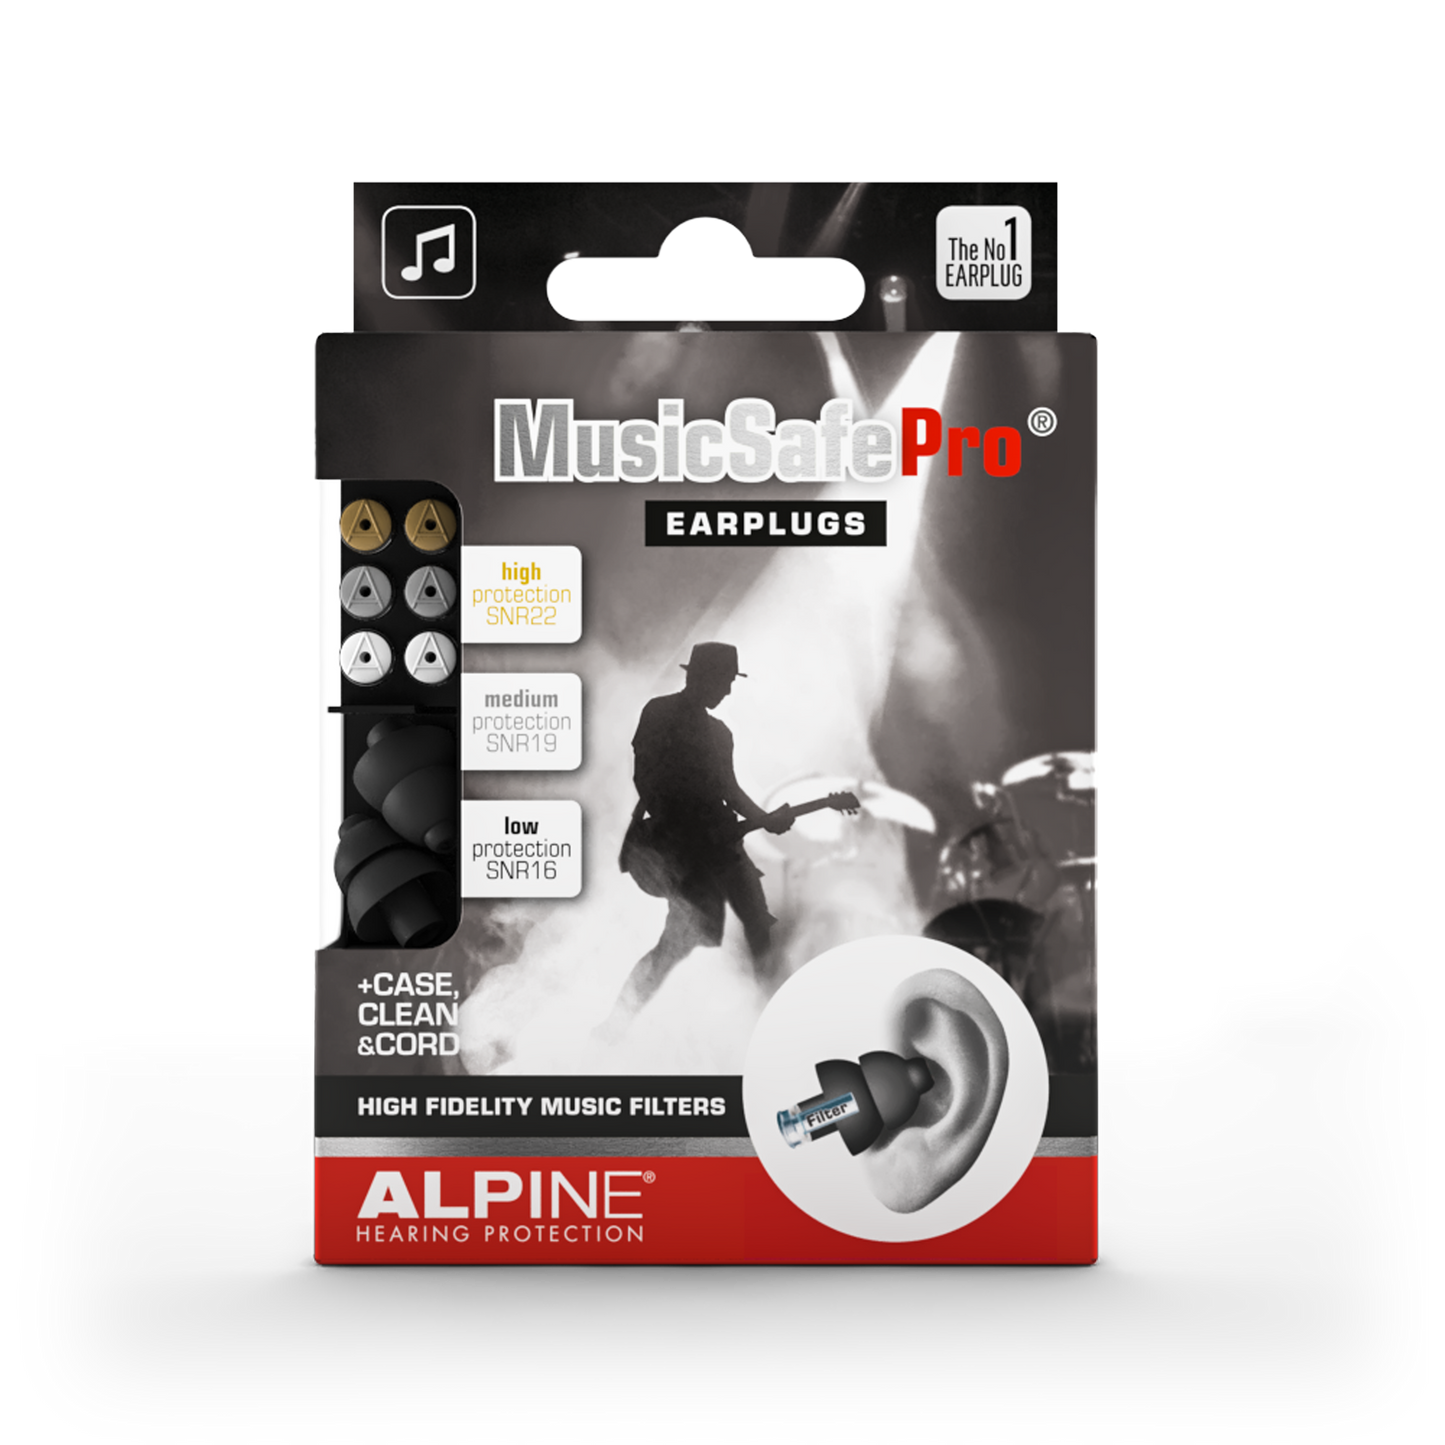 Alpine MusicSafe Pro earplugs for musicians Alpine hearing protection Earplugs earmuffs protect your ear red dot award party concert festival partyplug MusicSafe MusicSafe Earmuff MusicSafe Pro Guitar 